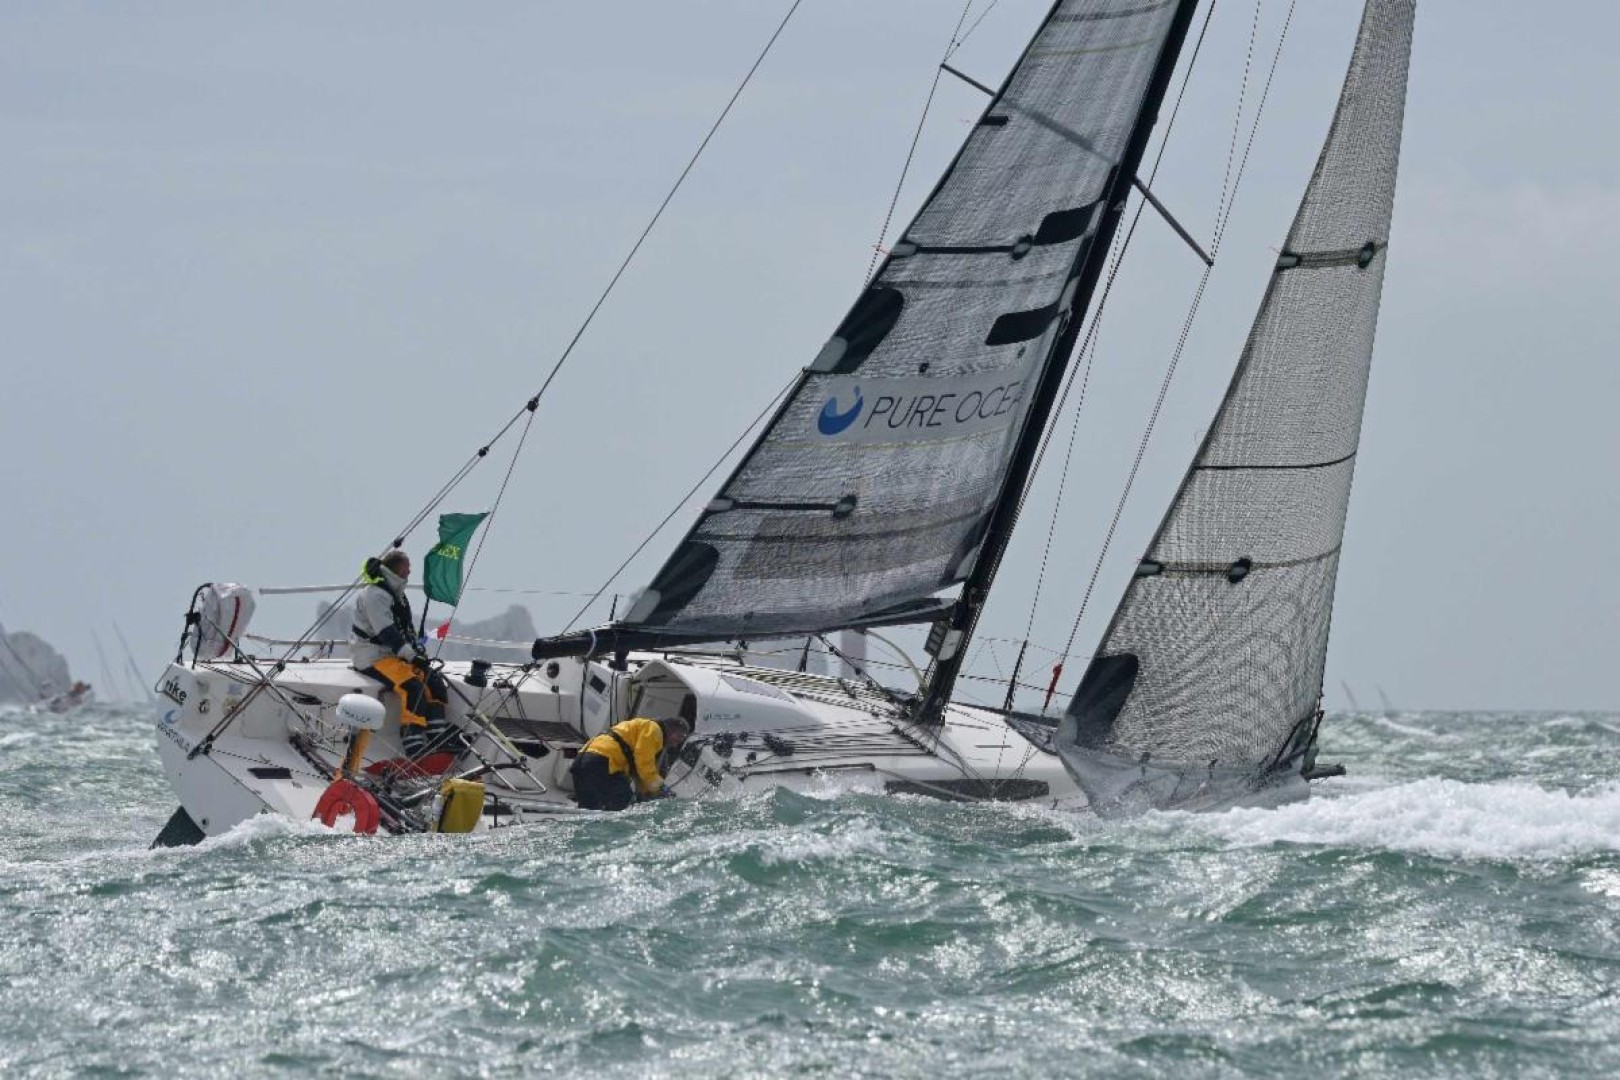 Competing Two-Handed in IRC Four with Nicolas Brossay, Ludo Gerard’s JPK 1080 Solenn for Pure Ocean ﻿© Rick Tomlinson